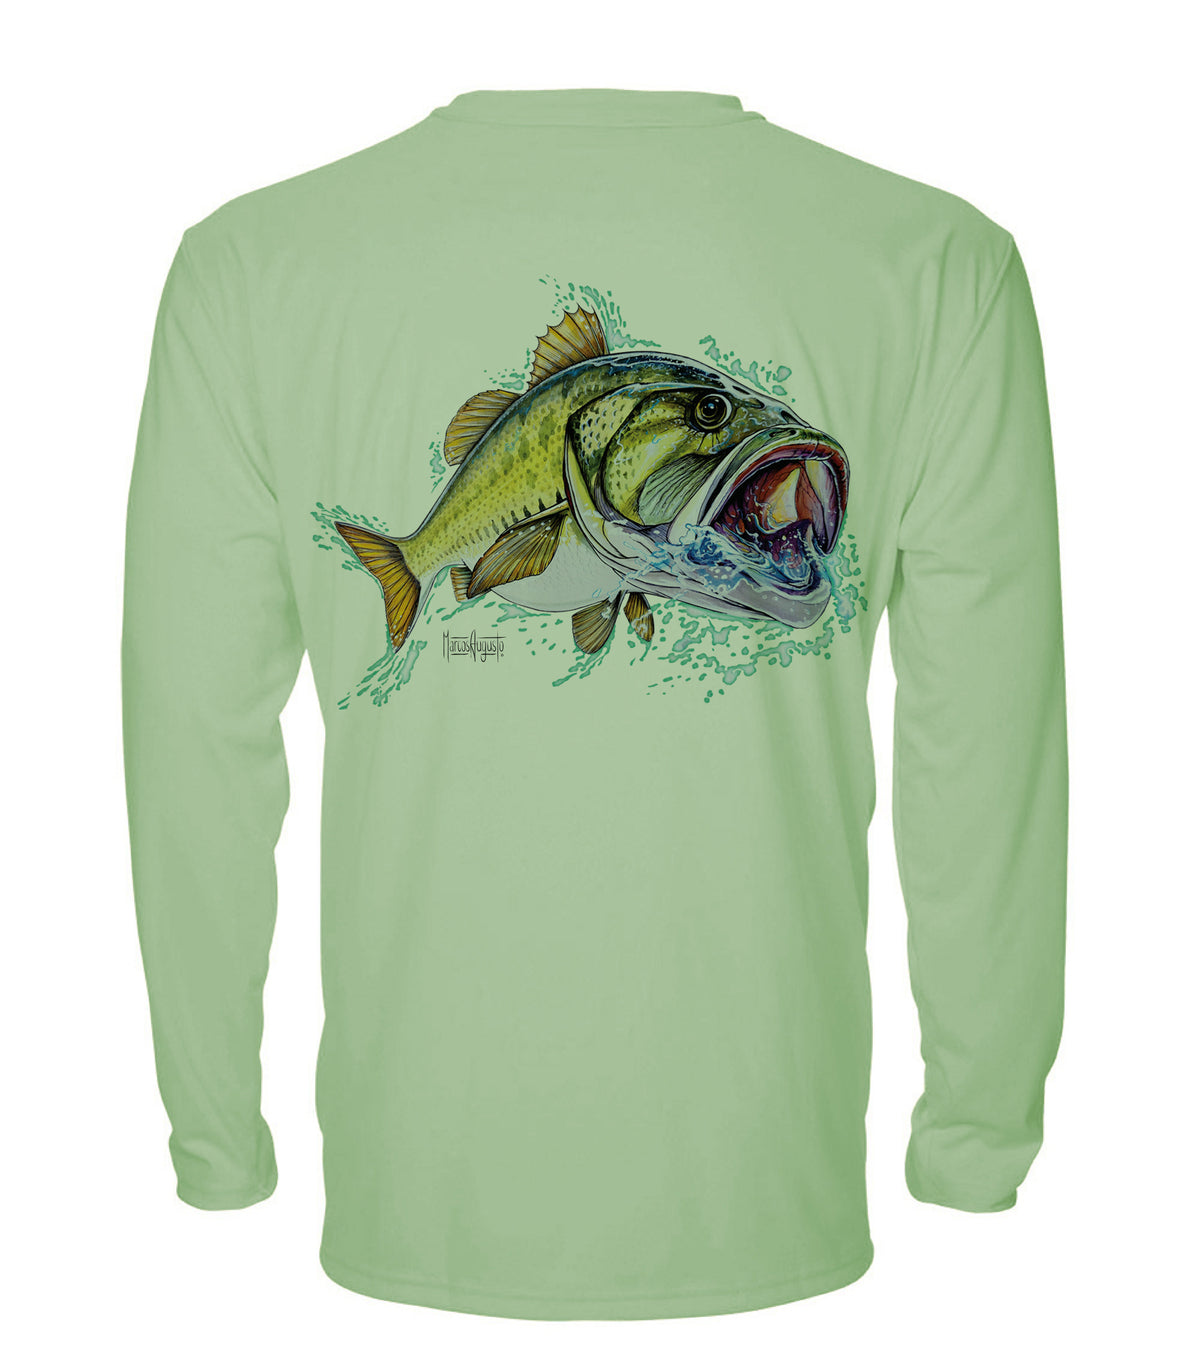 New Artwork] Large Mouth Bass Fishing Shirts for Men - Long Sleeve